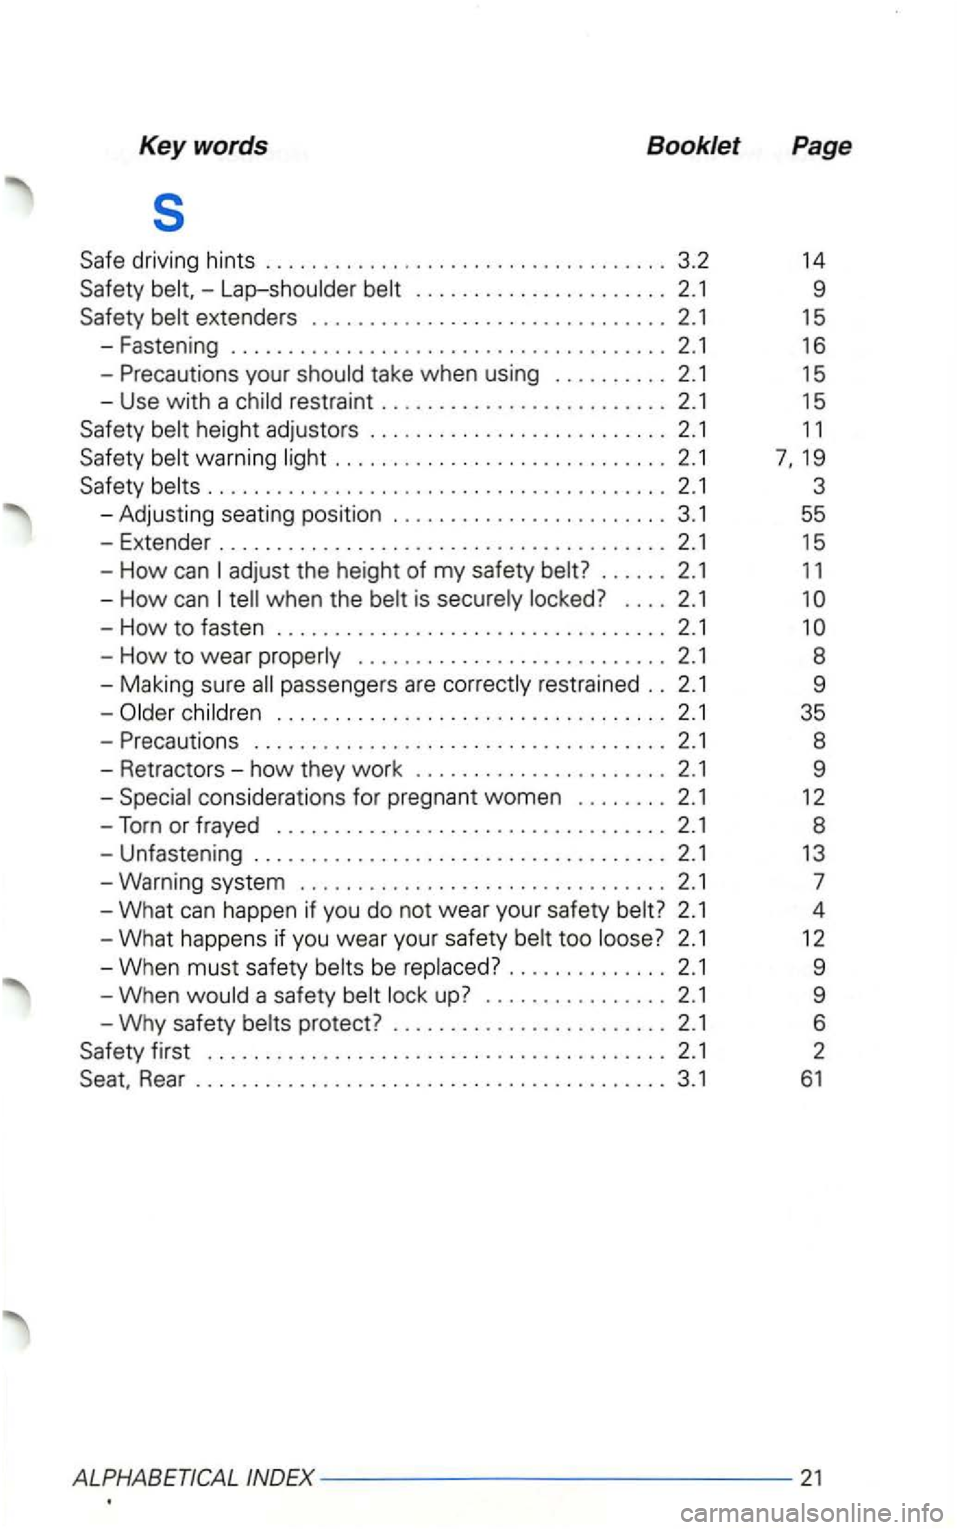 VOLKSWAGEN GOLF 2002  Owners Manual Keywords Booklet Page 
s 
driving hints ..... ........................... ... 3.2 14 
adjust  the height  of my  safety  belt? . . . . . . 2.1  11 
-How can 
children .................................